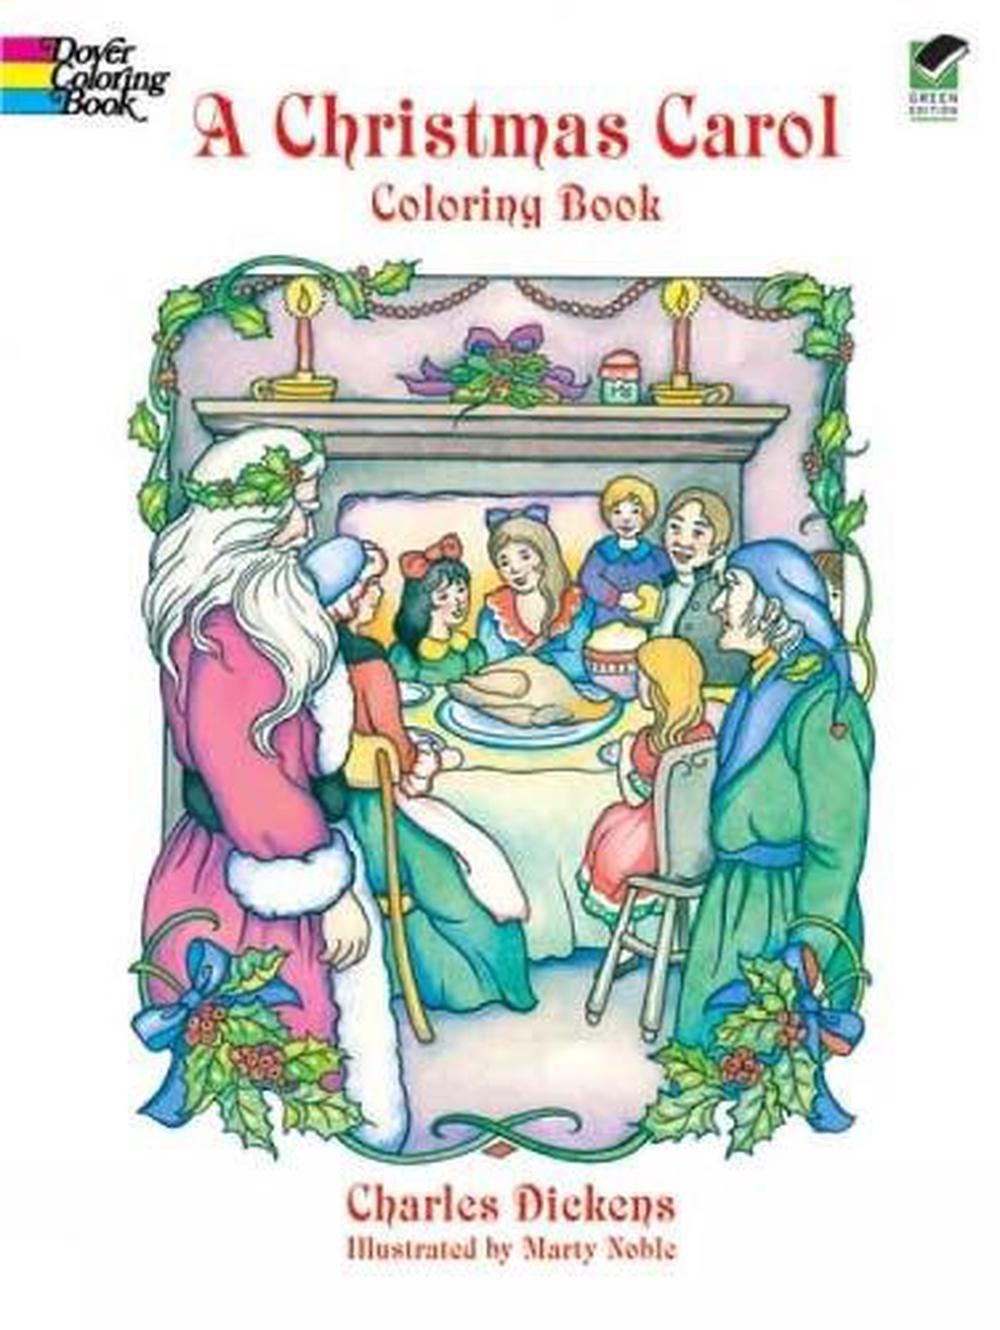 A Christmas Carol Coloring Book by Charles Dickens (English) Paperback Book Free 9780486405636 ...